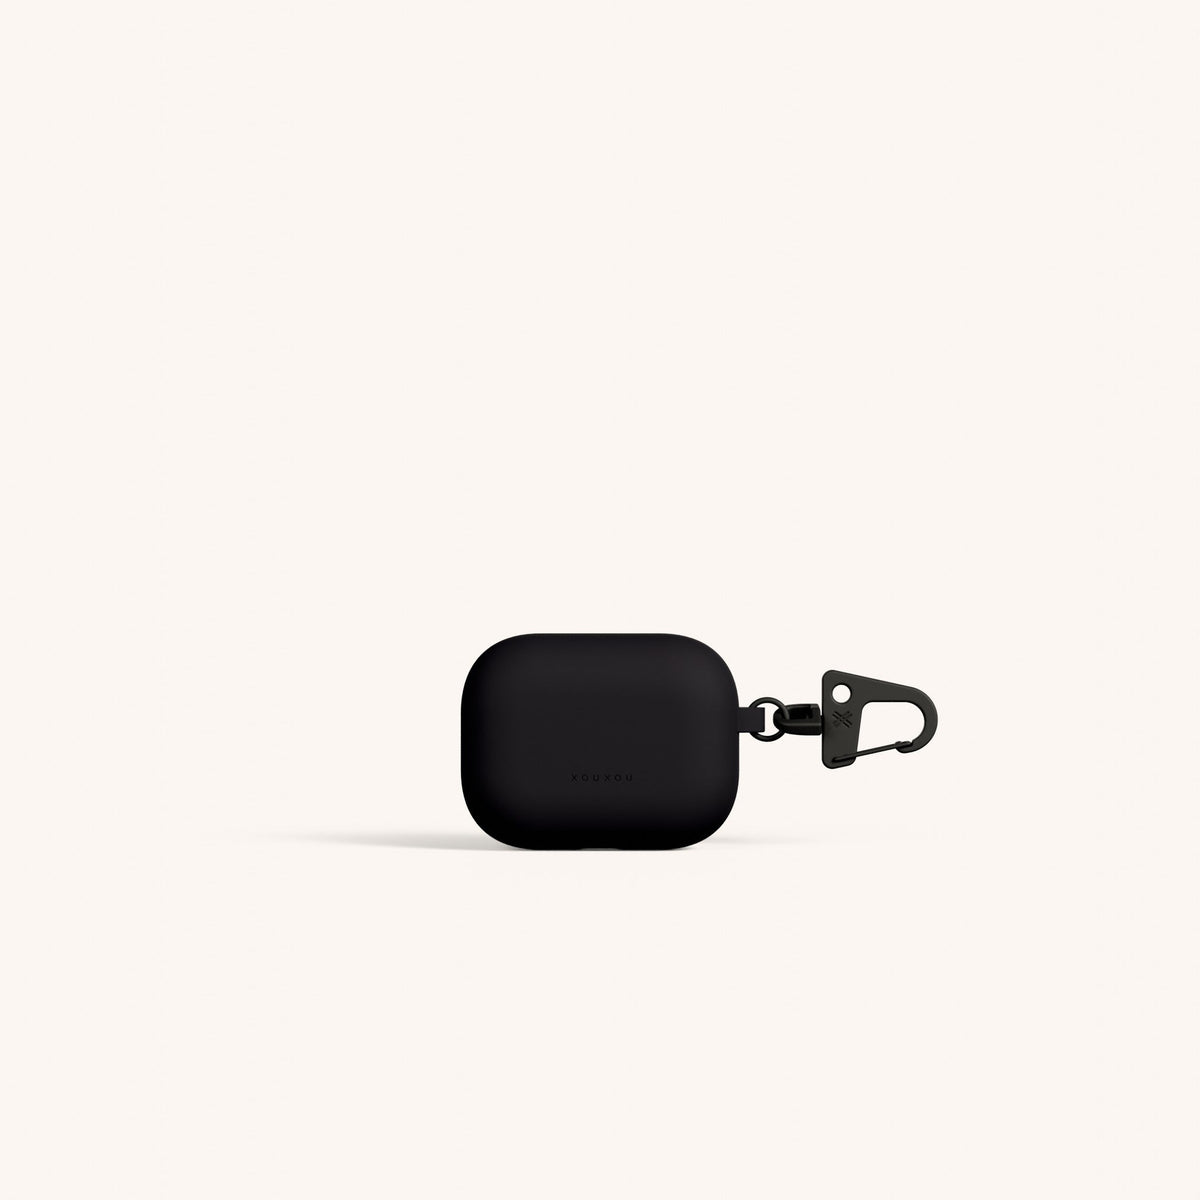 AirPods Case for AirPods Pro 1st Generation (2nd Generation compatible) in Black Total View | XOUXOU #airpods model_pro 1st gen (2nd gen comp.)